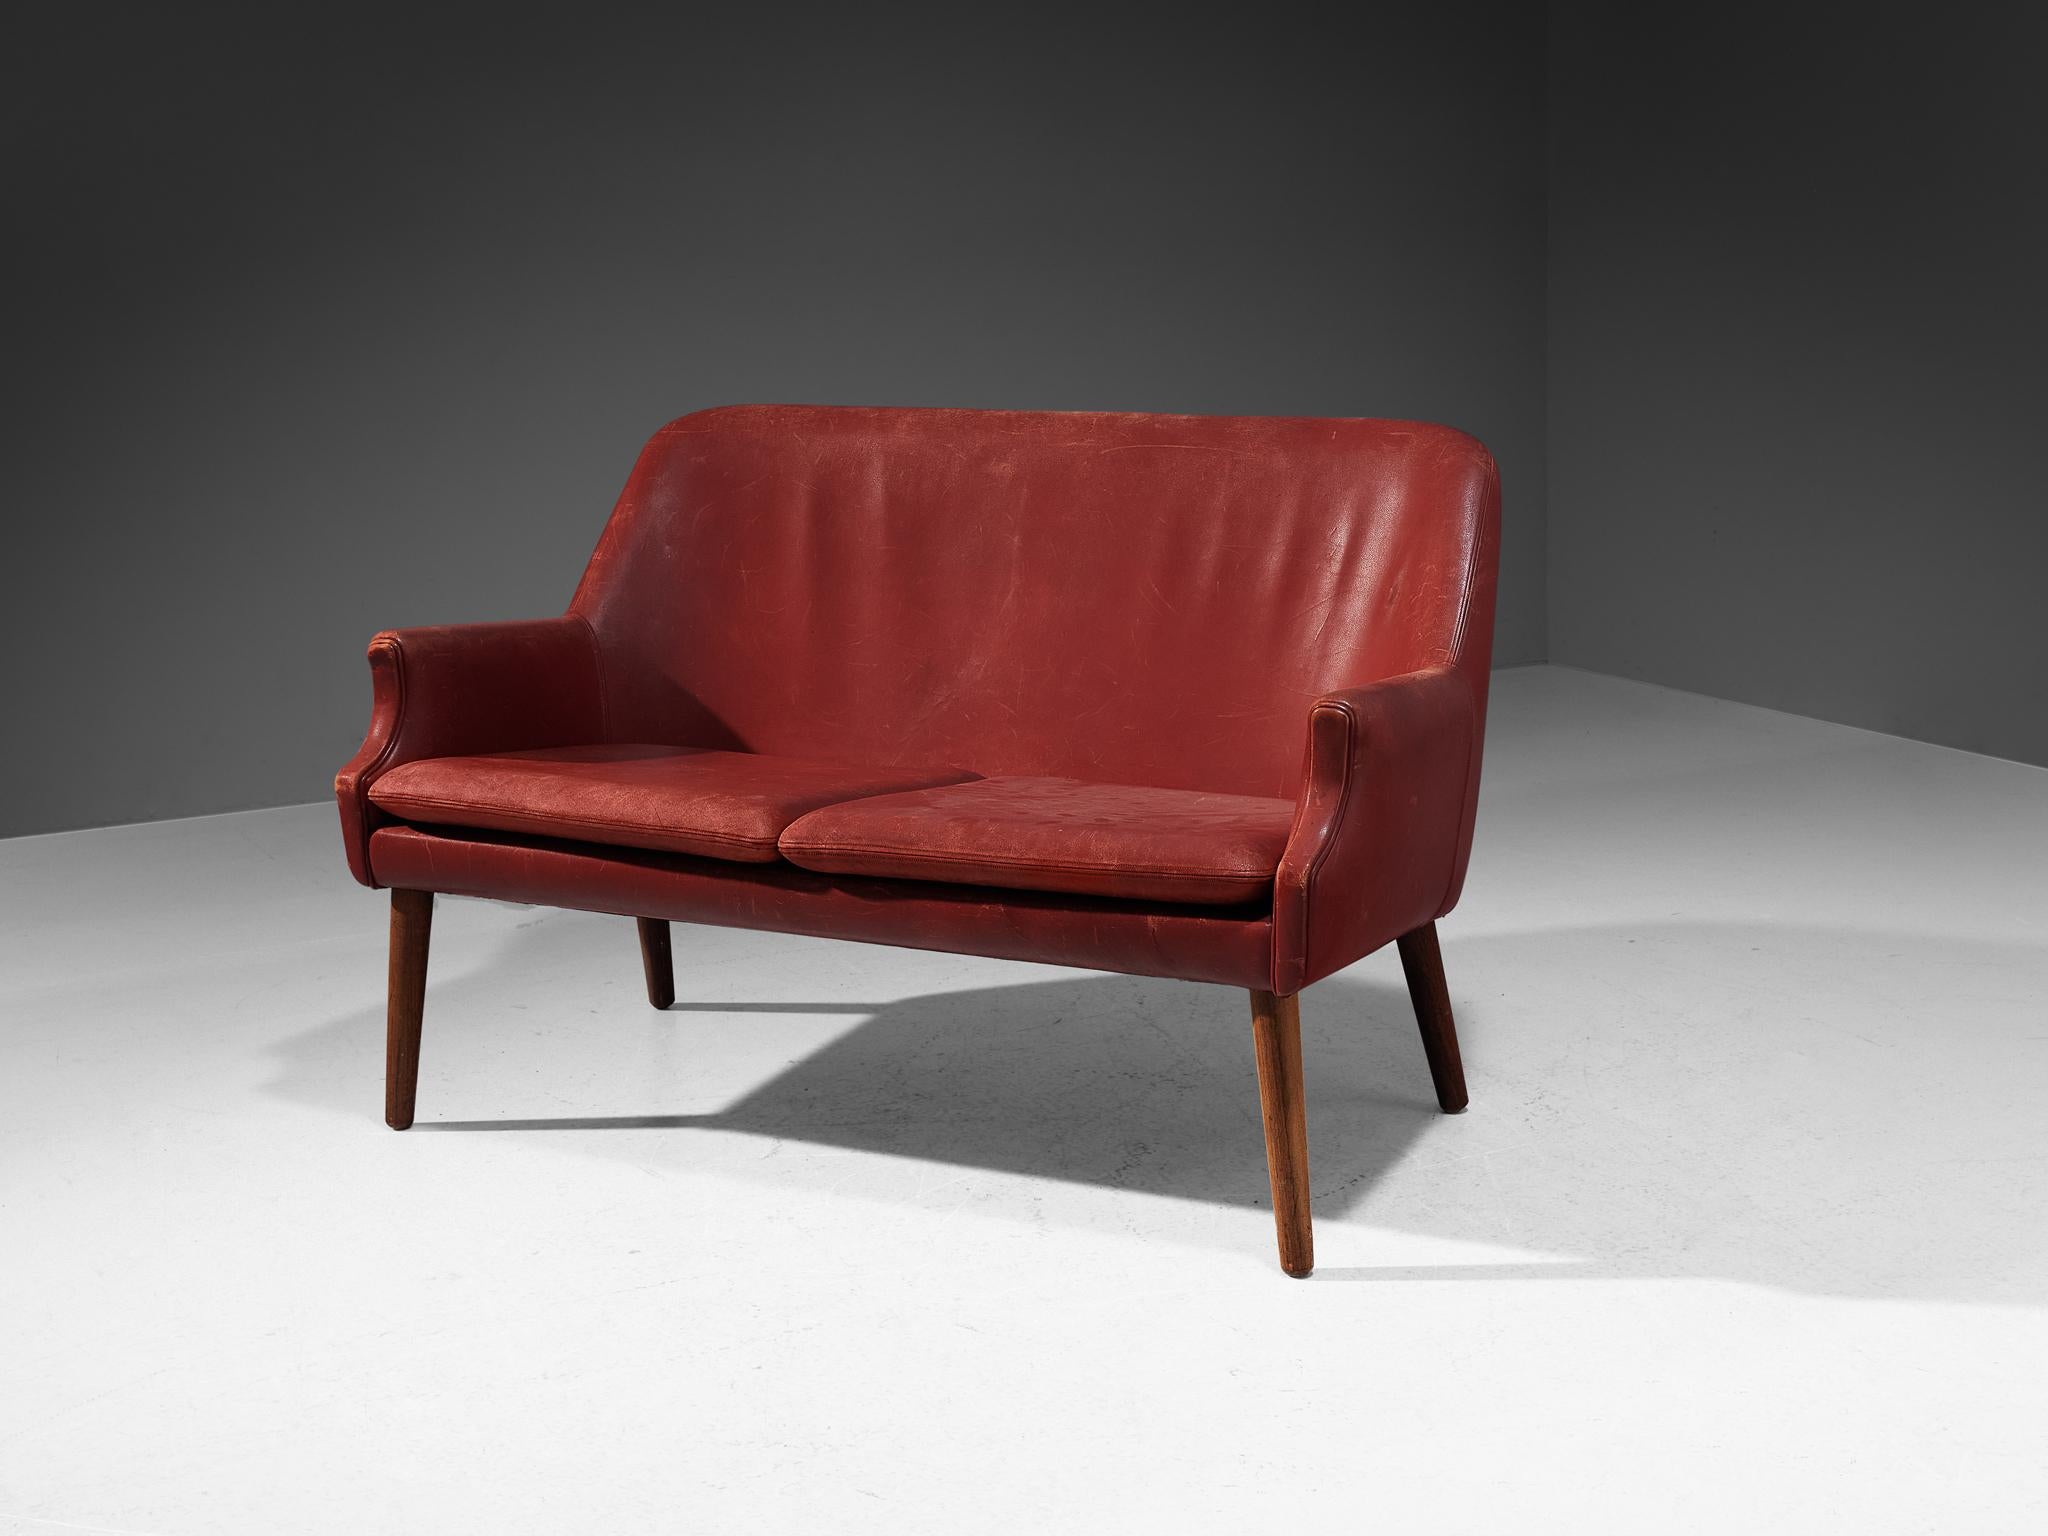 Sofa or settee, leather, wood, Scandinavia, 1950s

A beautifully sculpted sofa in the style of Danish designer Arne Vodder. The high back is slightly curved and runs smoothly over into the pointed armrests. The tapered wooden legs provide a nice